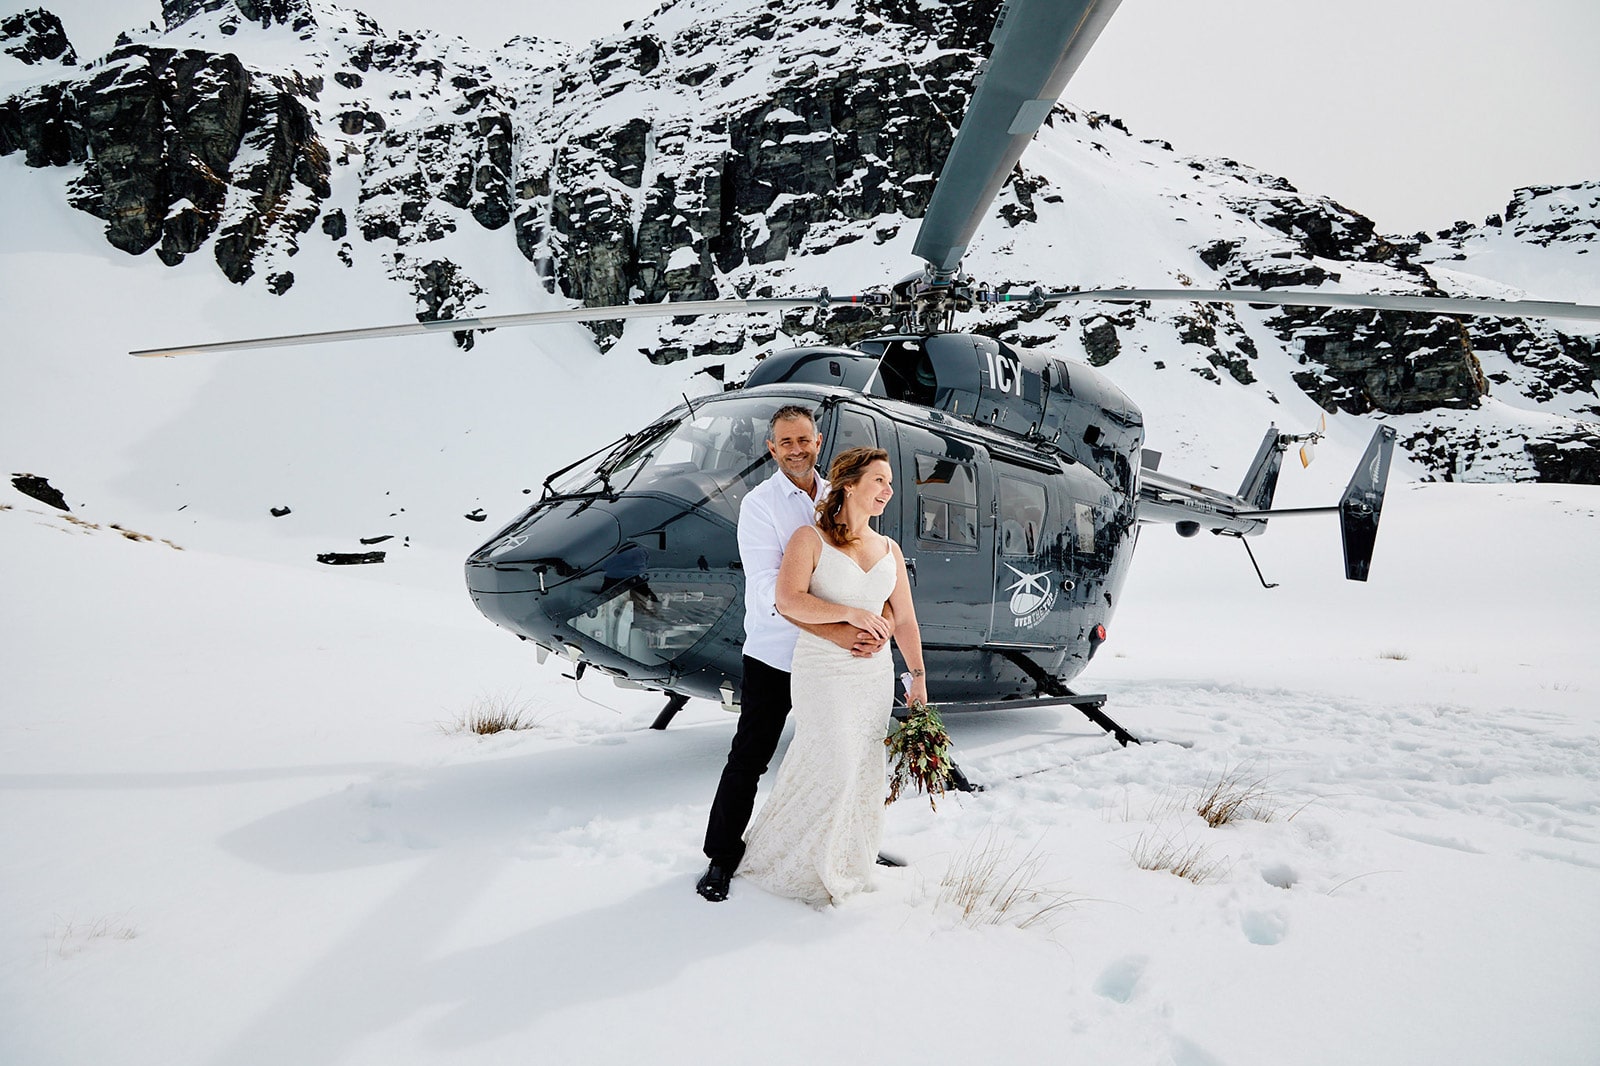 Queenstown Helicopters